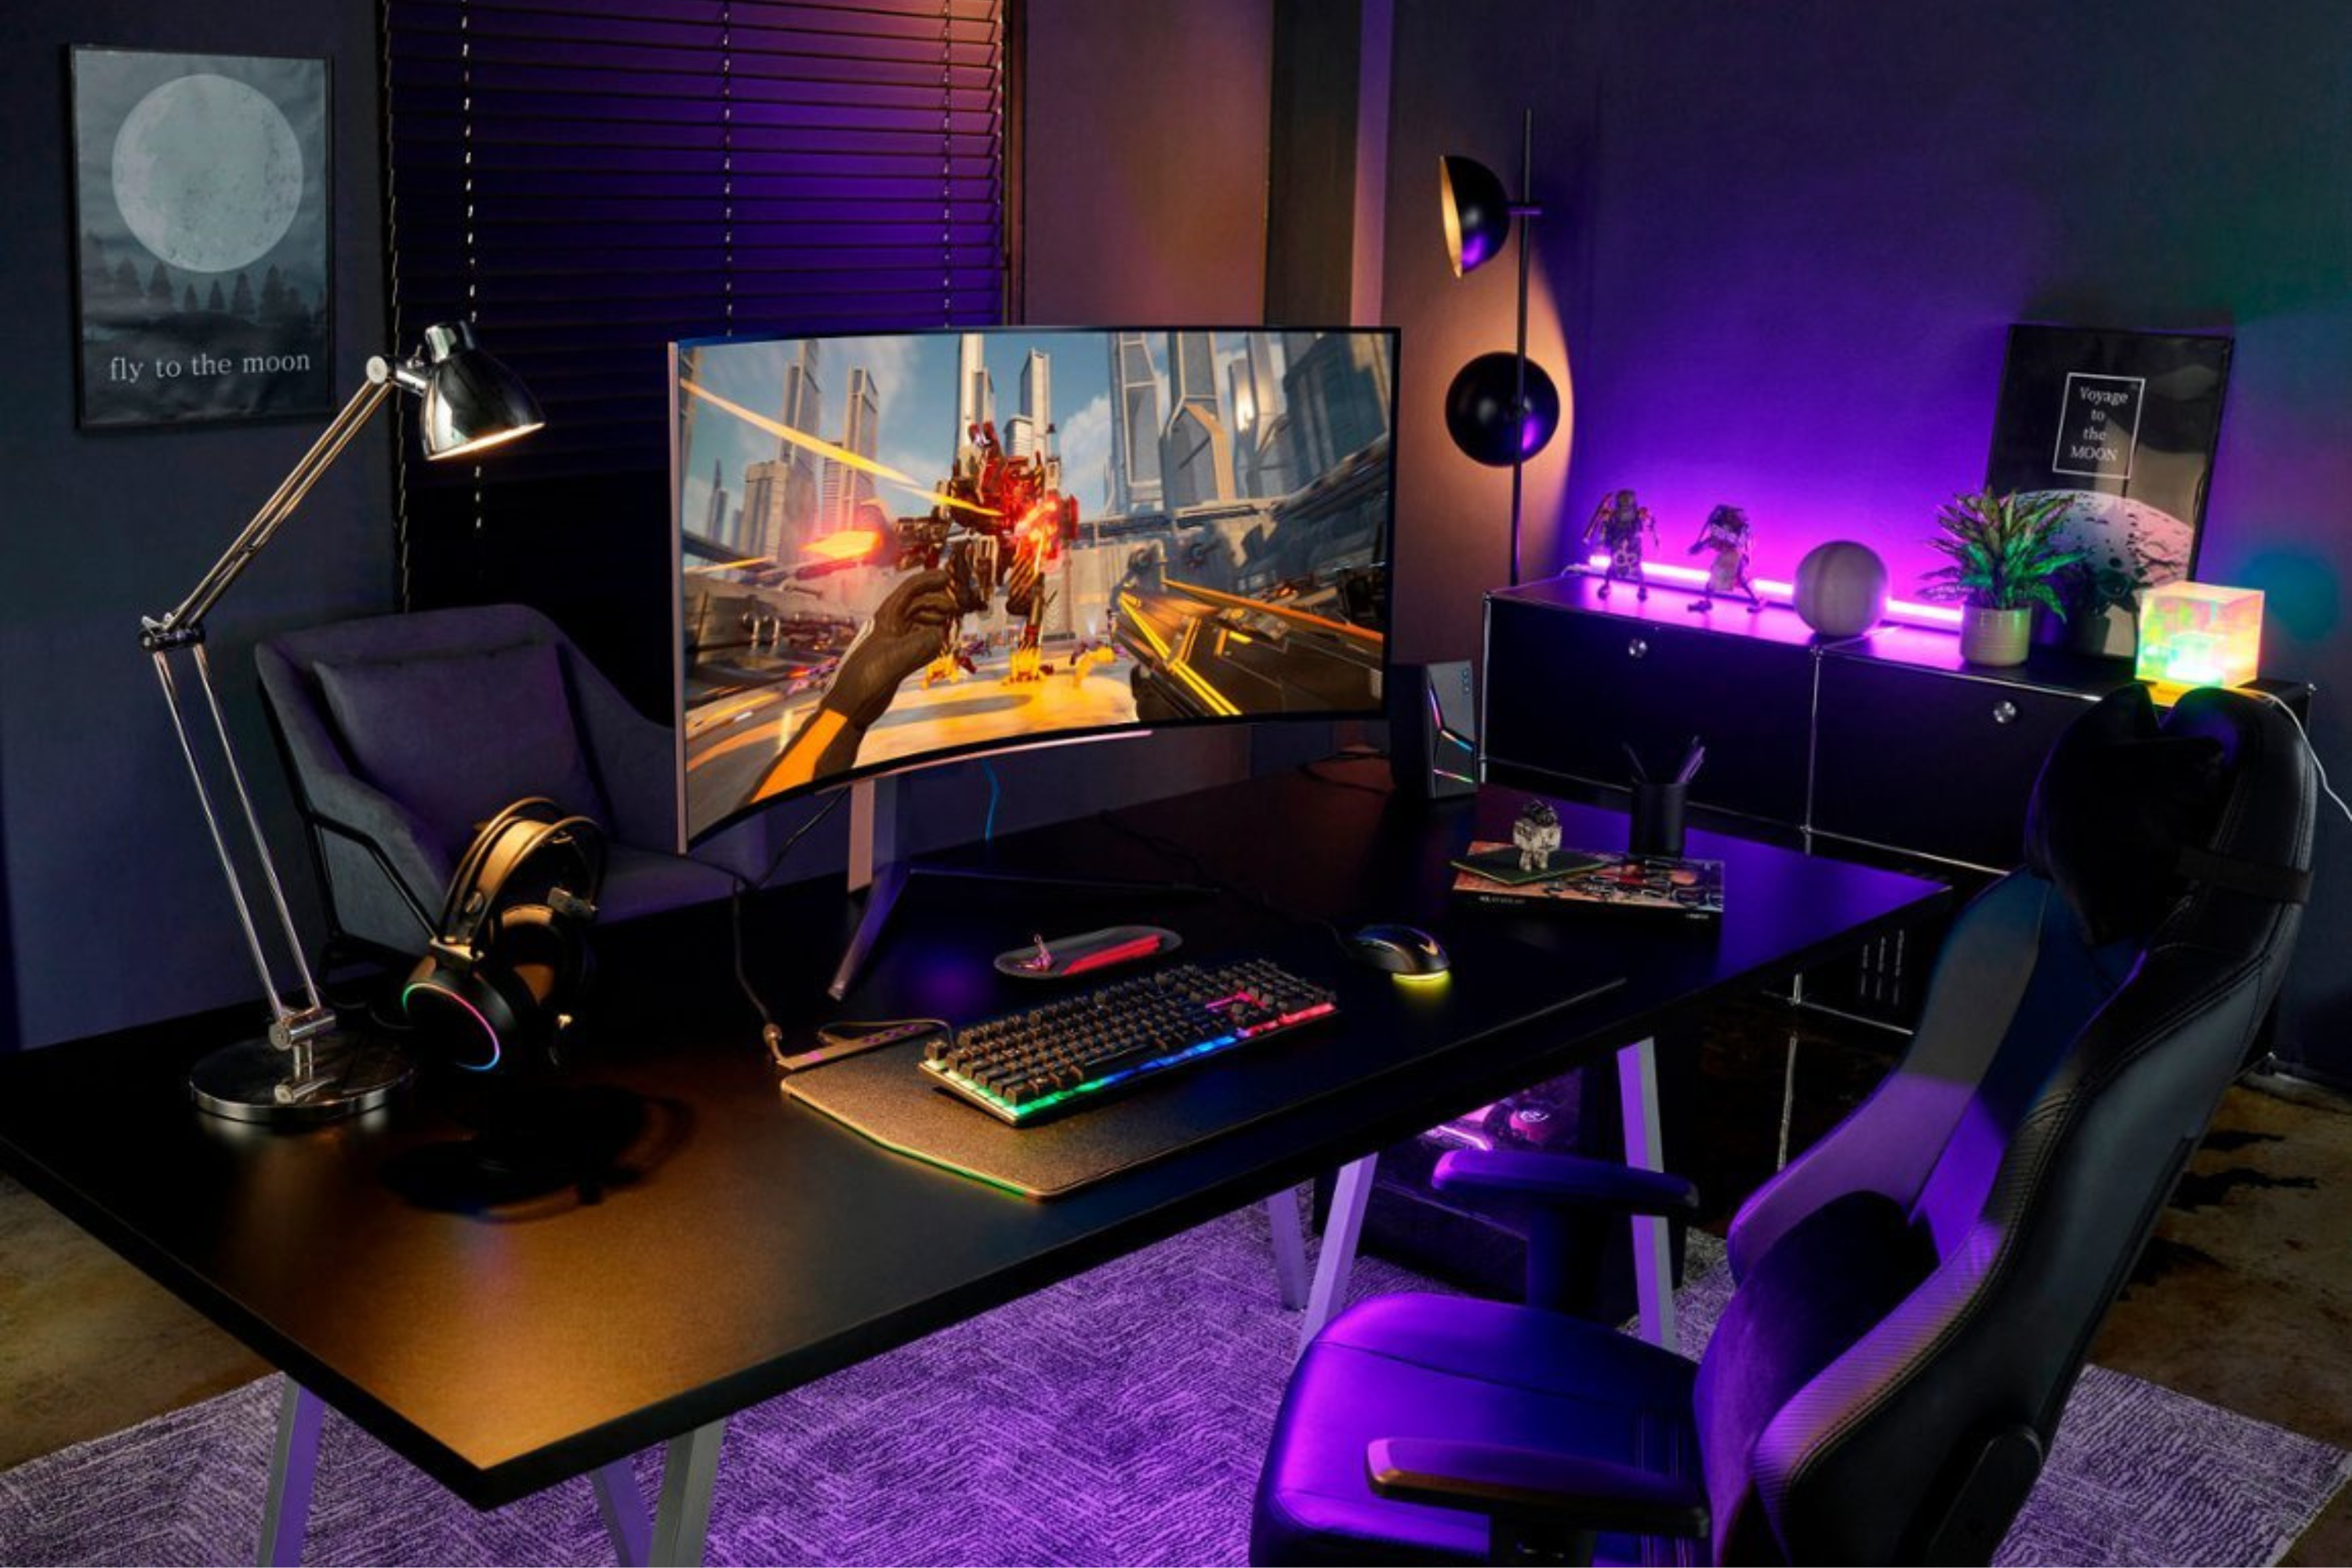 LG UltraGear 45” OLED Curved Gaming Monitor on desk in gaming room with RGB lighting